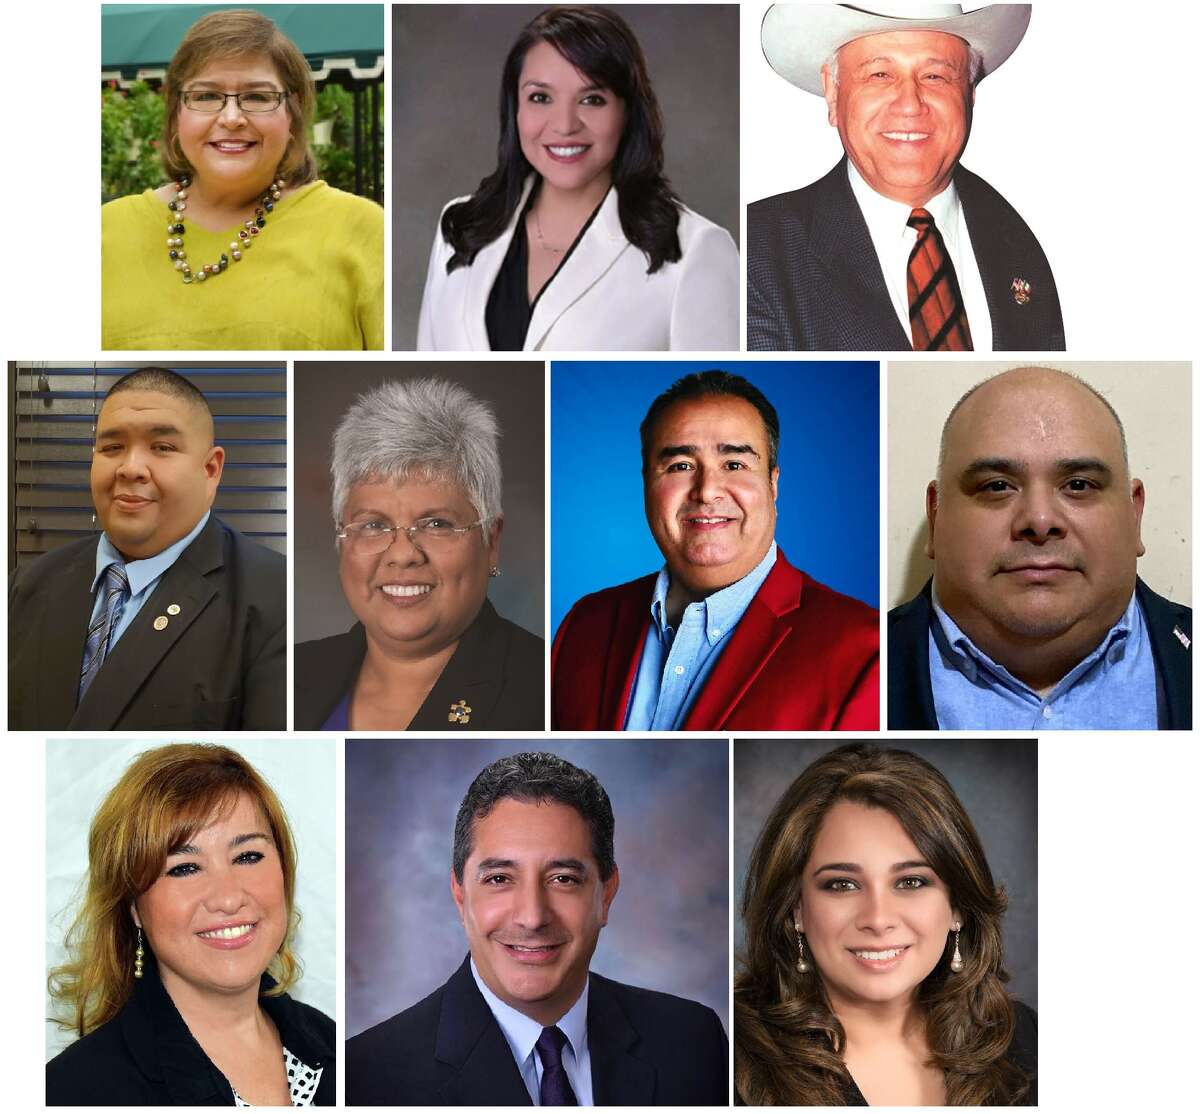 Pictured are the 10 elected candidates for their respective trustee positions for Laredo College, above, LISD, middle, and UISD, bottom.